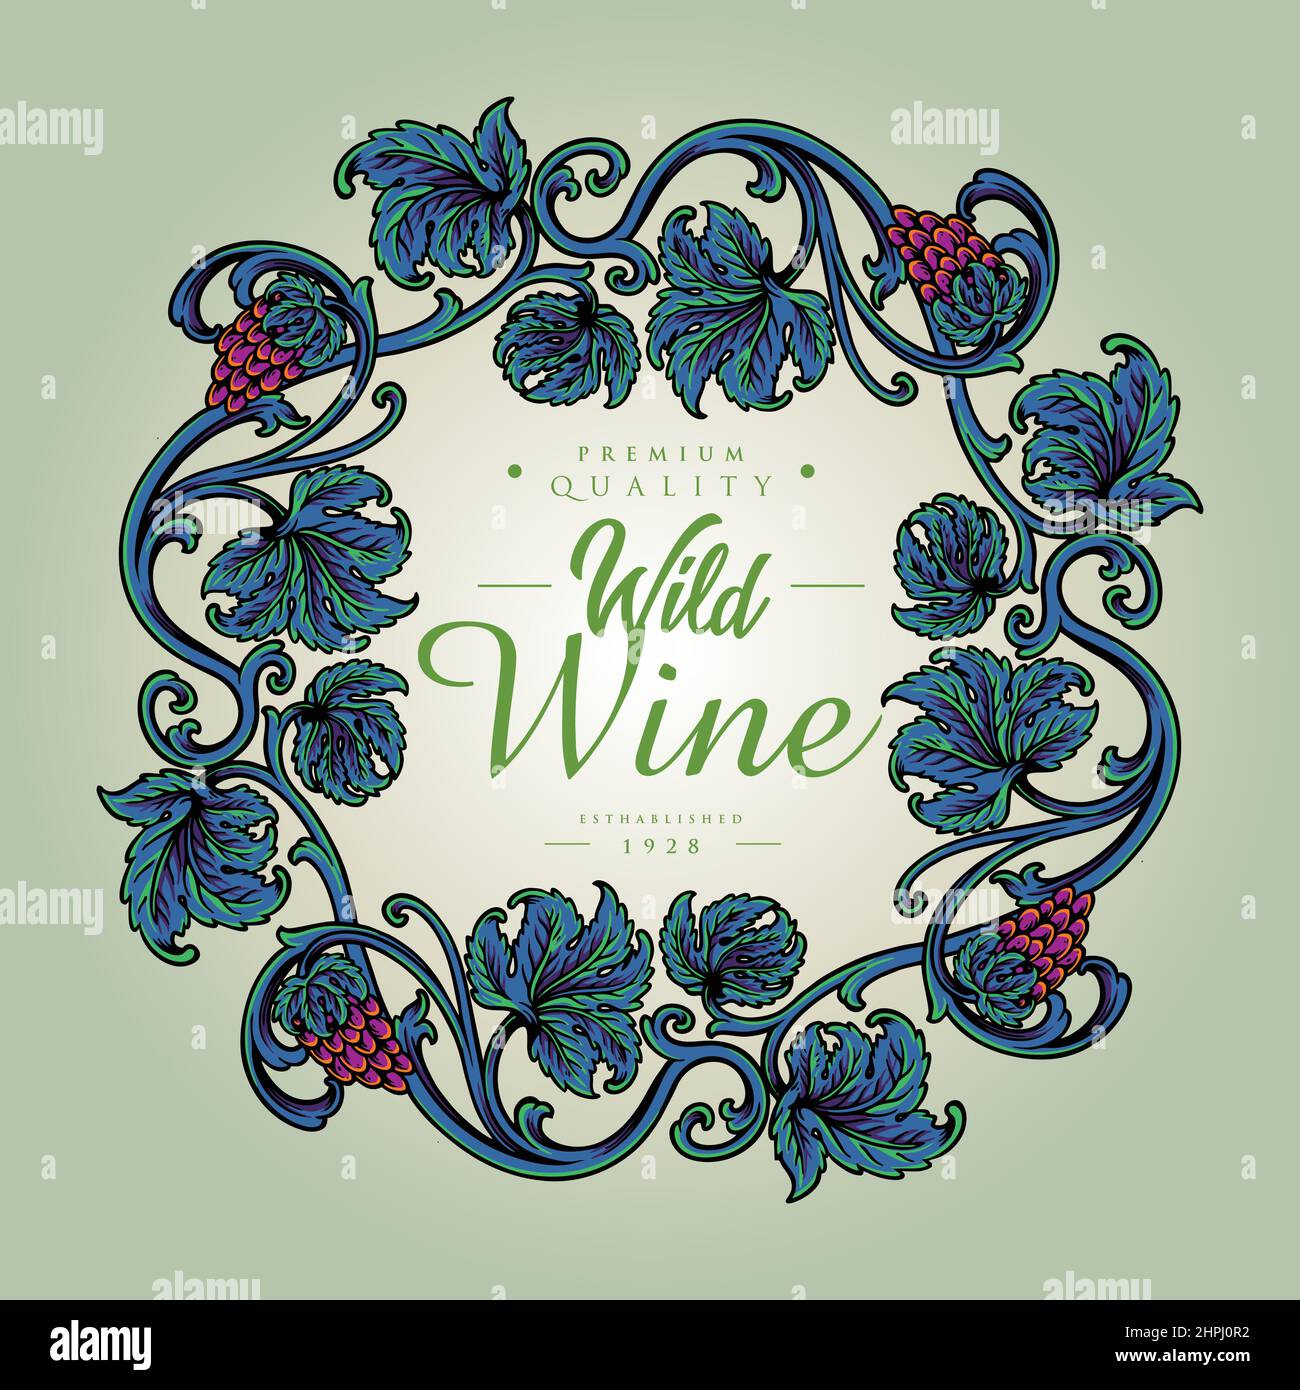 Elegant vintage wine floral label vector illustrations for your work logo, merchandise t-shirt, stickers and label designs, poster, greeting cards Stock Vector